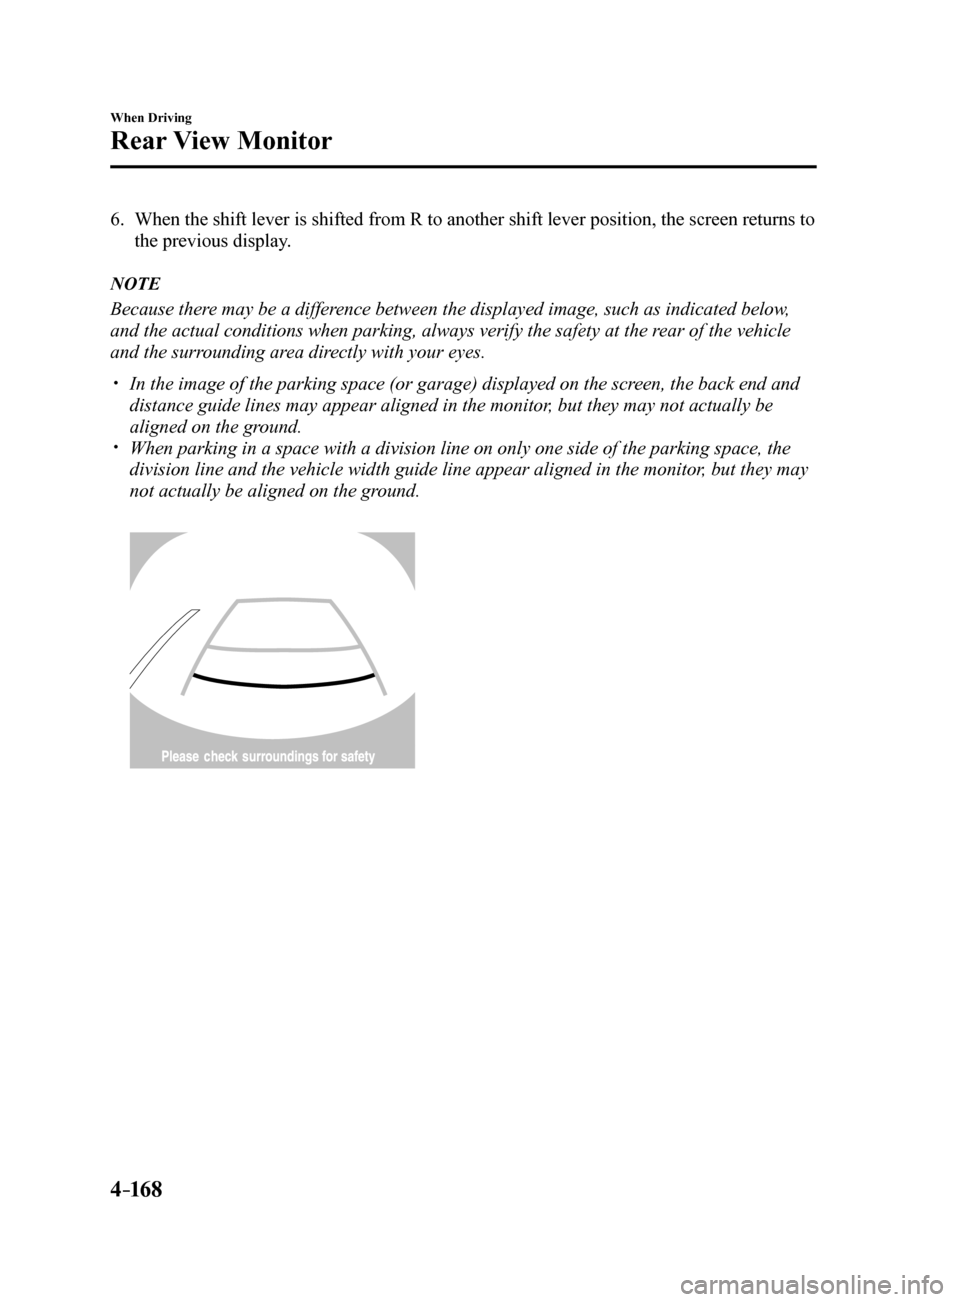 MAZDA MODEL 6 2017  Owners Manual (in English) 4–16 8
When Driving
Rear View Monitor
6. When the shift lever is shifted from R to another shift lever position, the screen returns to 
the previous display.
NOTE
Because there may be a difference b